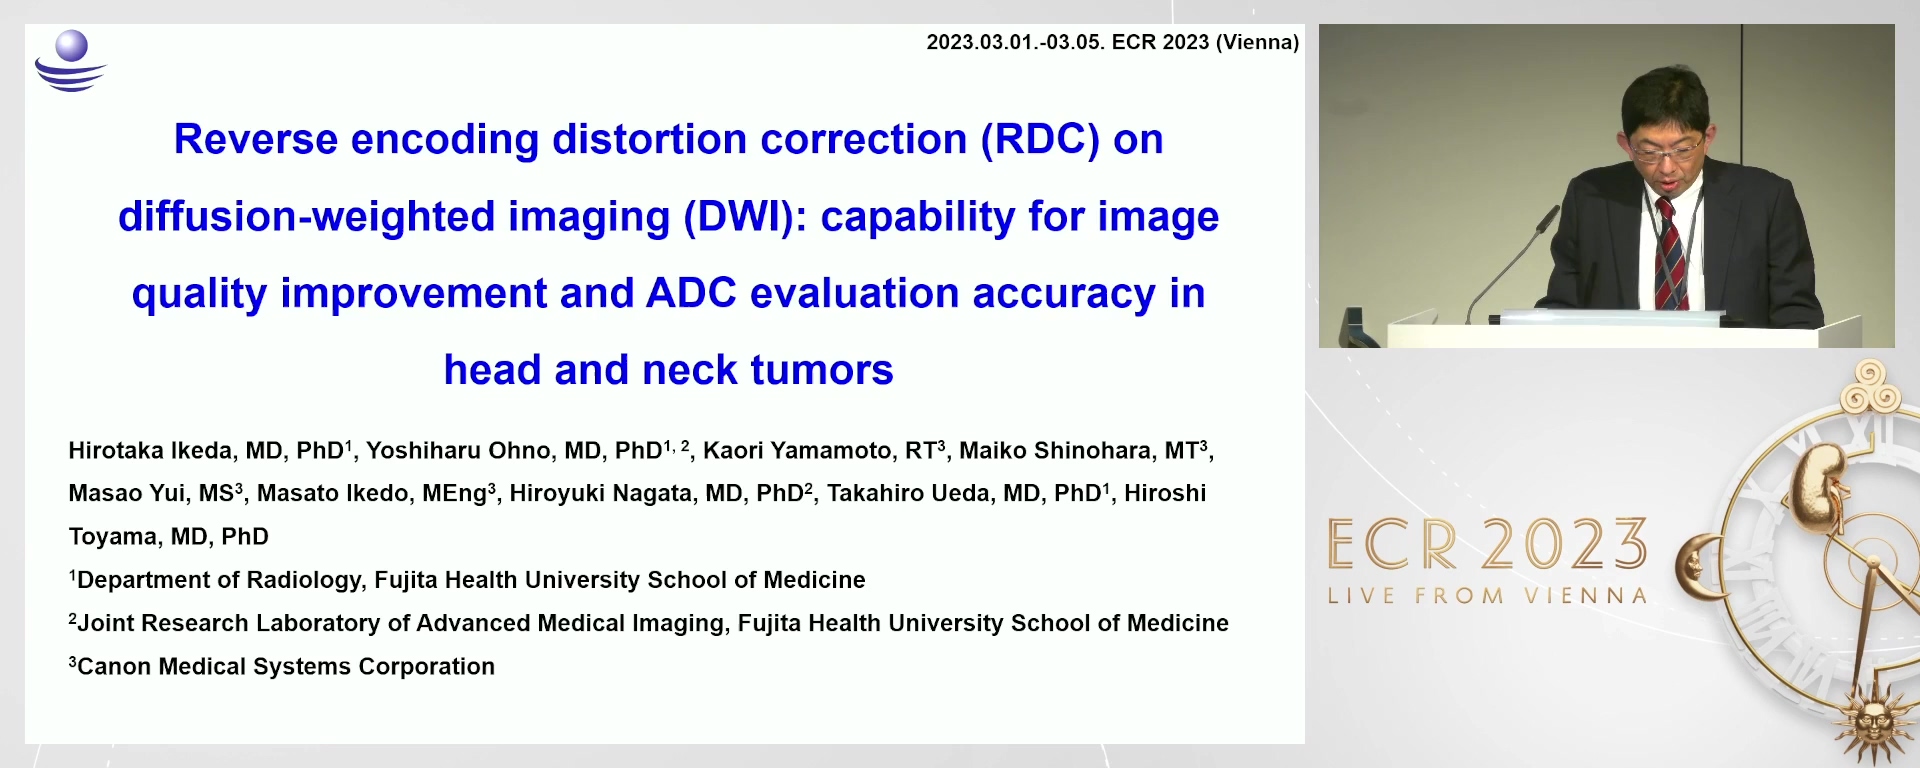 Reverse encoding distortion correction (RDC) on diffusion-weighted imaging (DWI): capability for image quality improvement and ADC evaluation accuracy in head and neck tumours - Yoshiharu  Ohno, Toyoake / JP